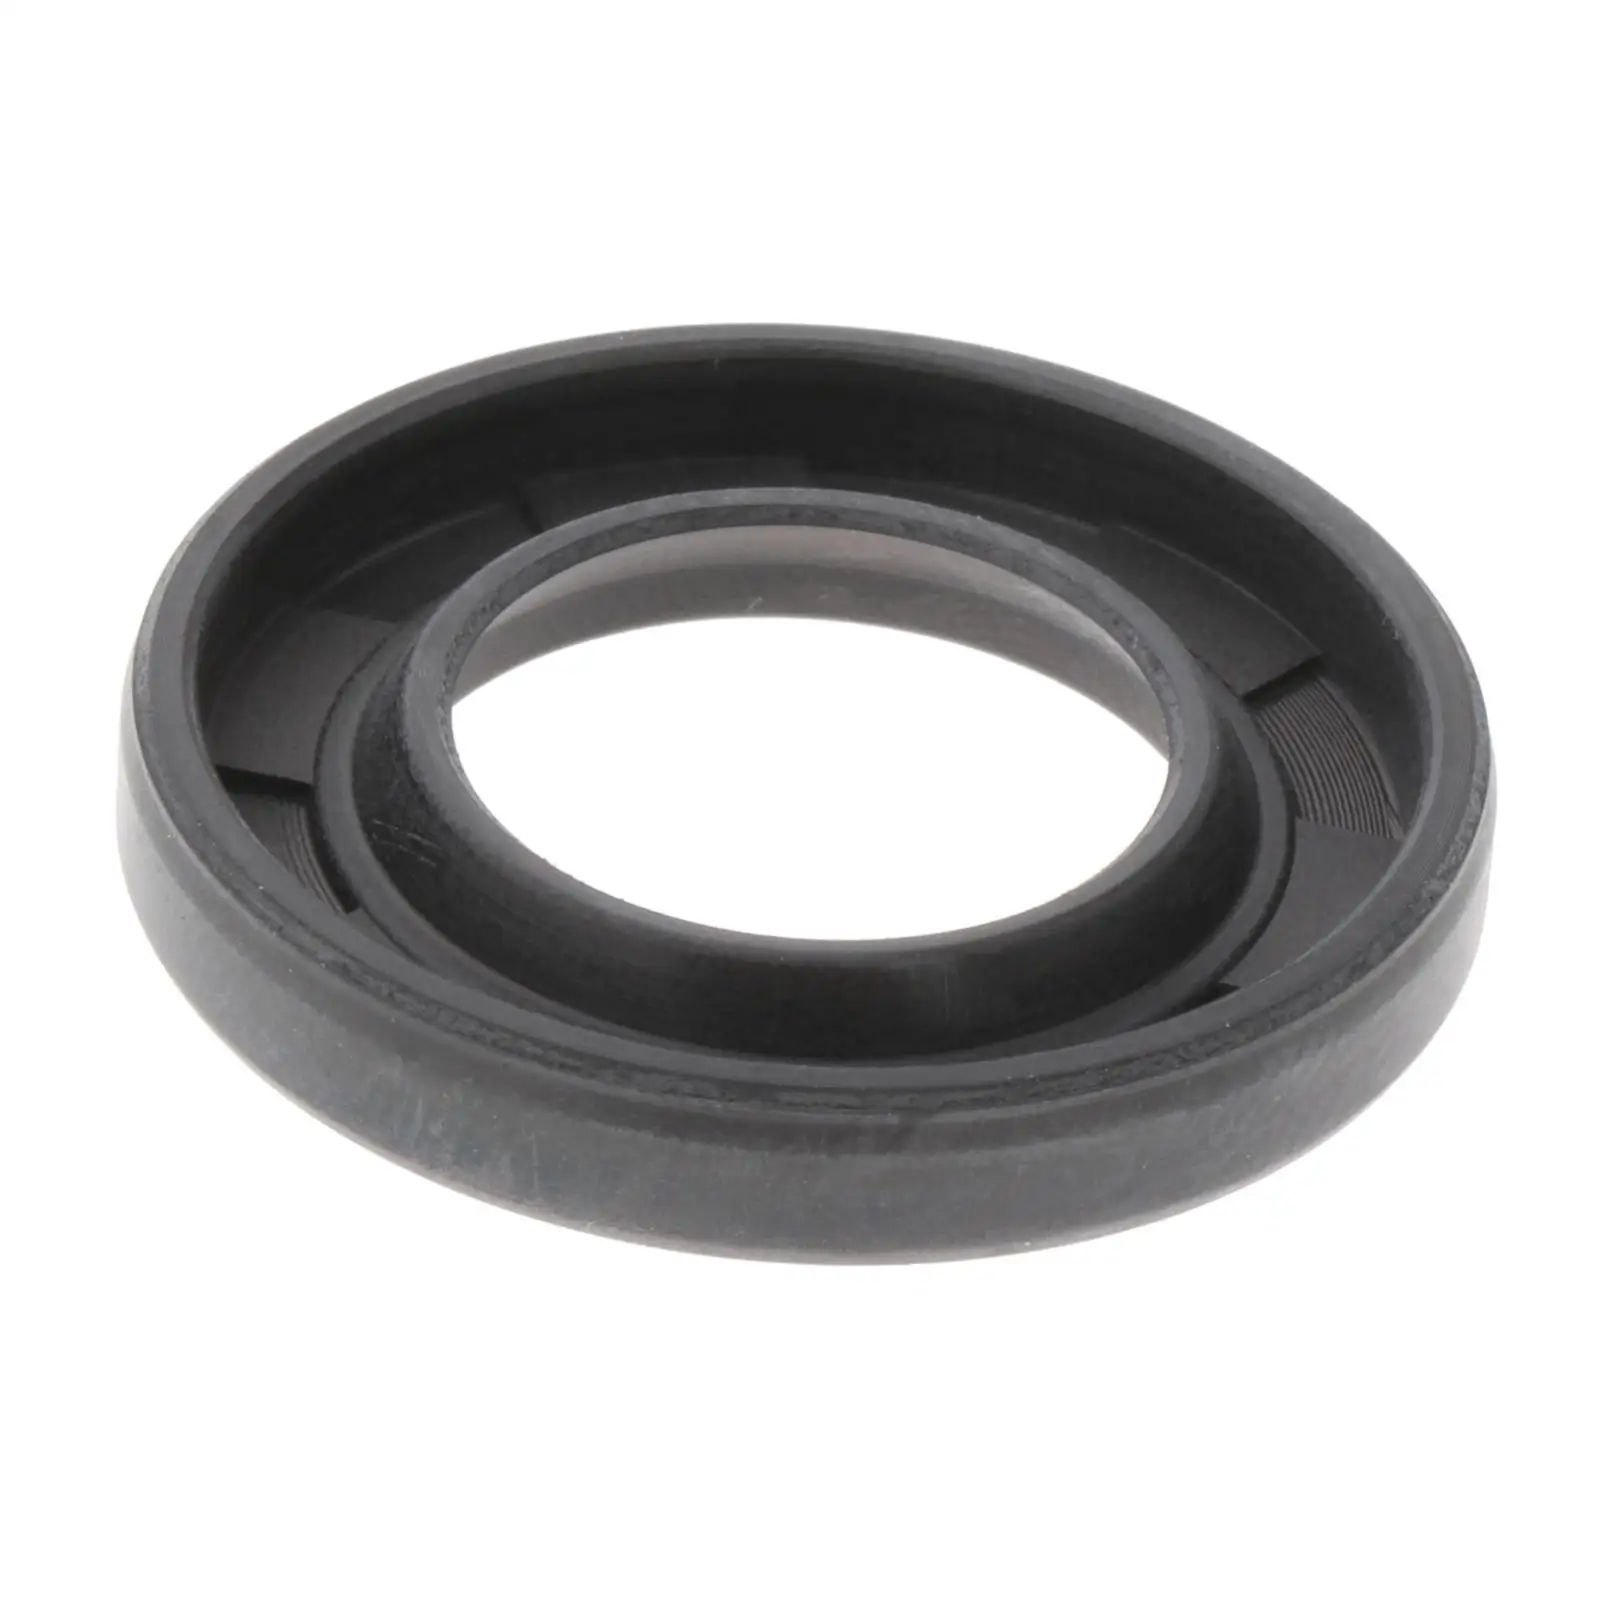 Oil Seal Direct Replaces for Yamaha Outboard Motor 60HP 70HP 2 Stroke